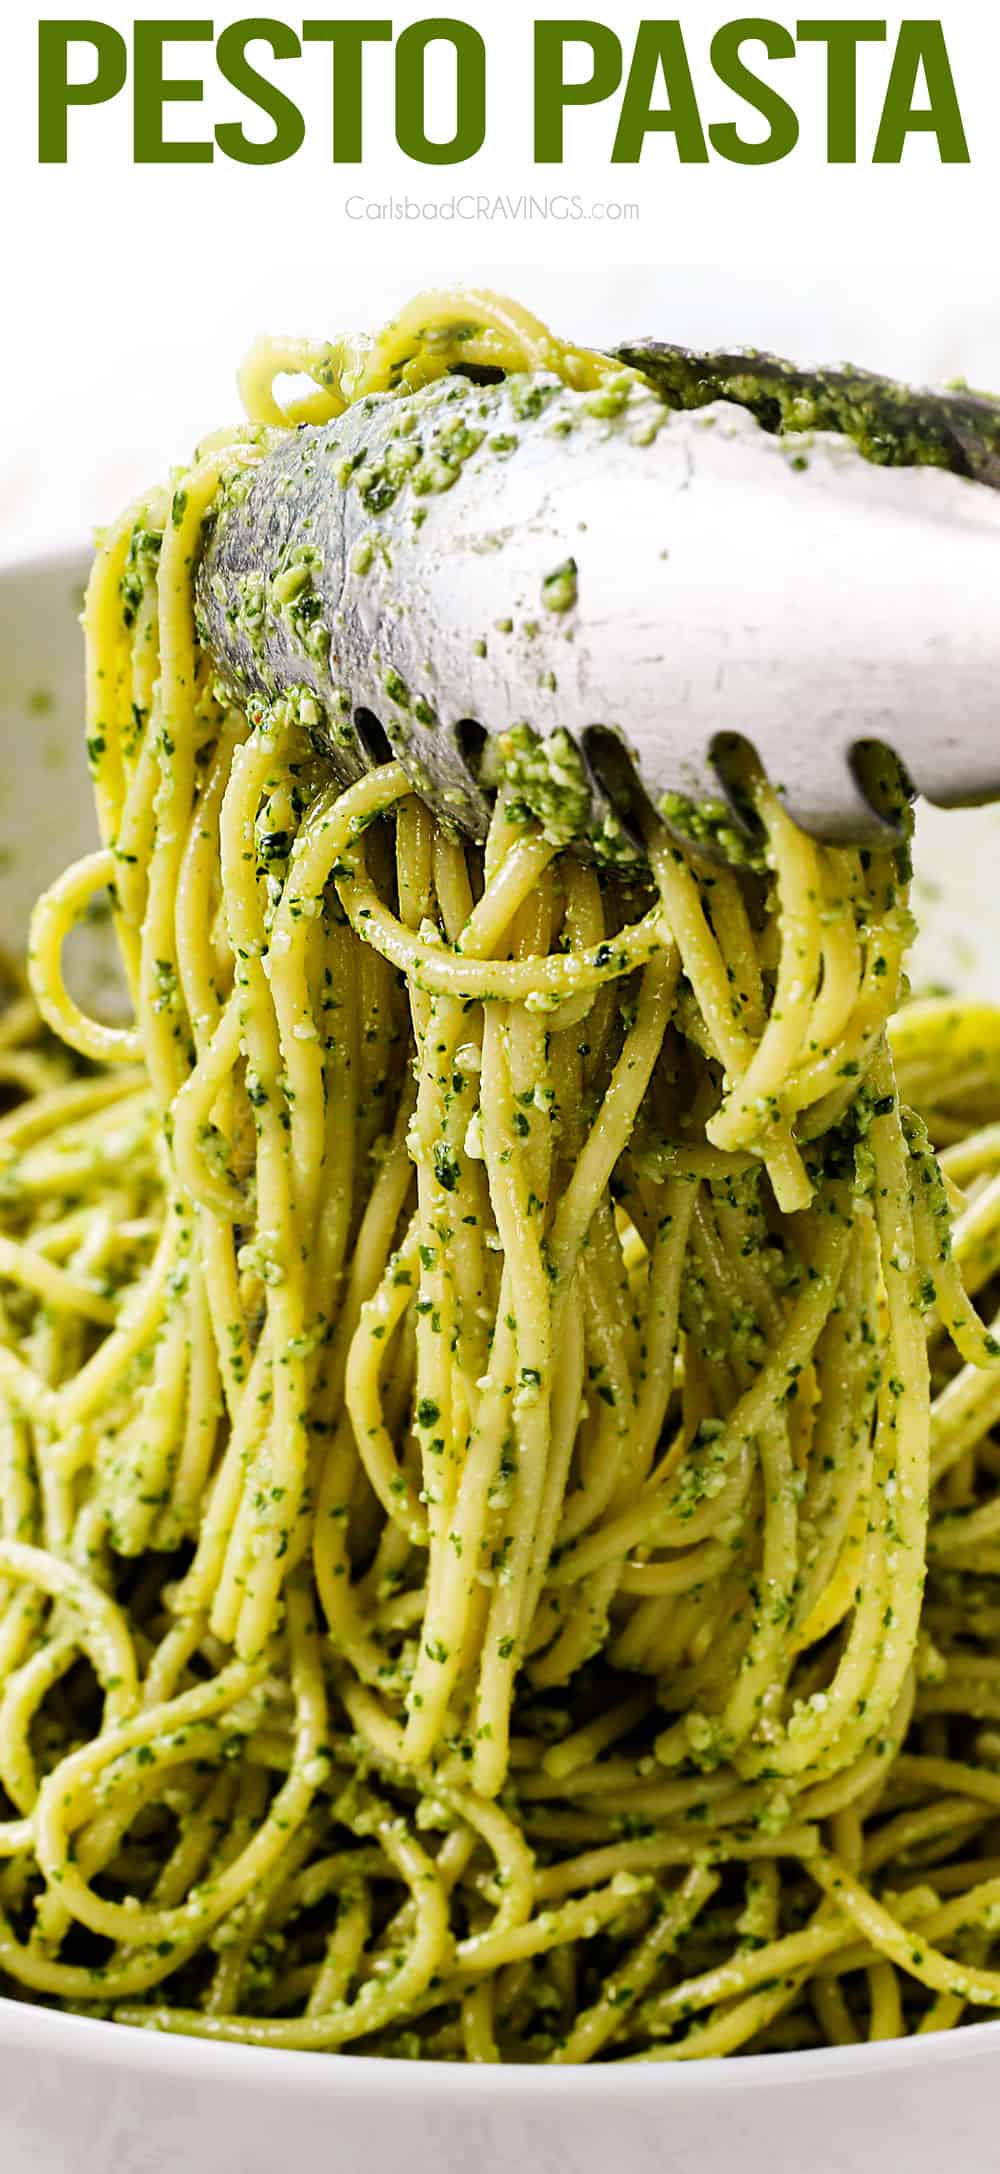 showing how to make pesto pasta recipe by tossing pesto with linguine pasta